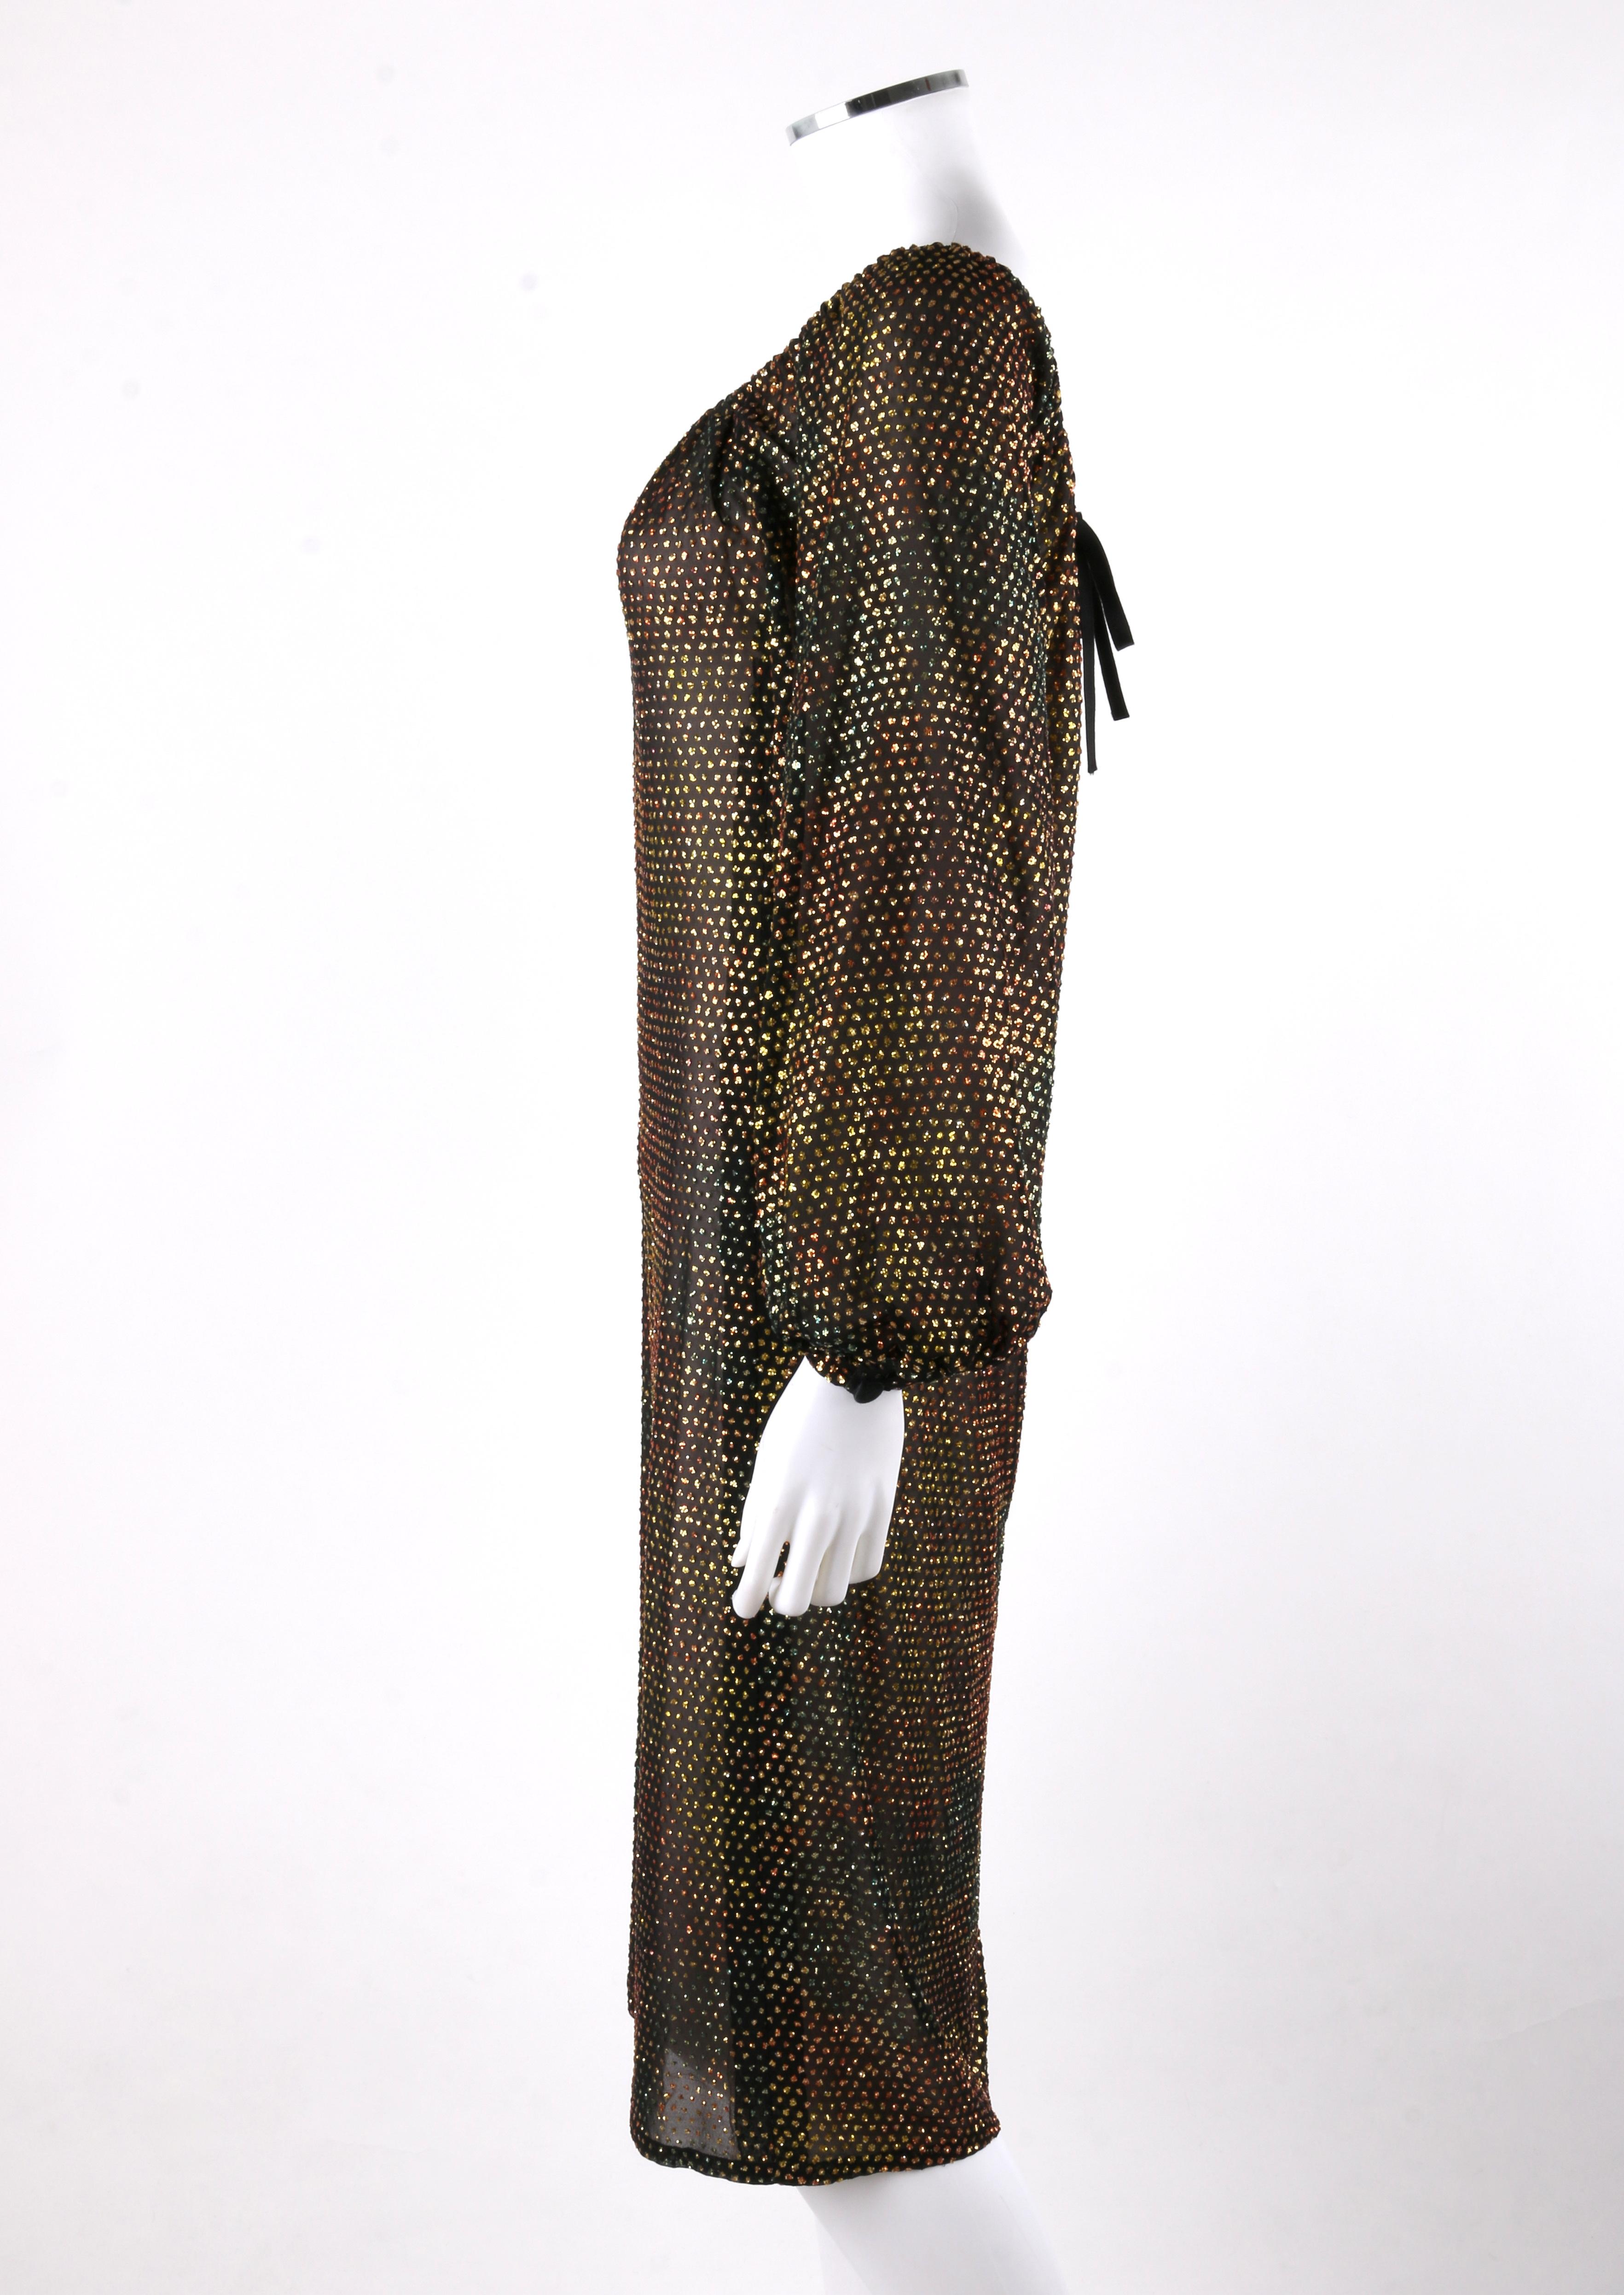 GIVENCHY HAUTE COUTURE c.1970s Black Gold-Rainbow Bishop Sleeve Shift Dress For Sale 1